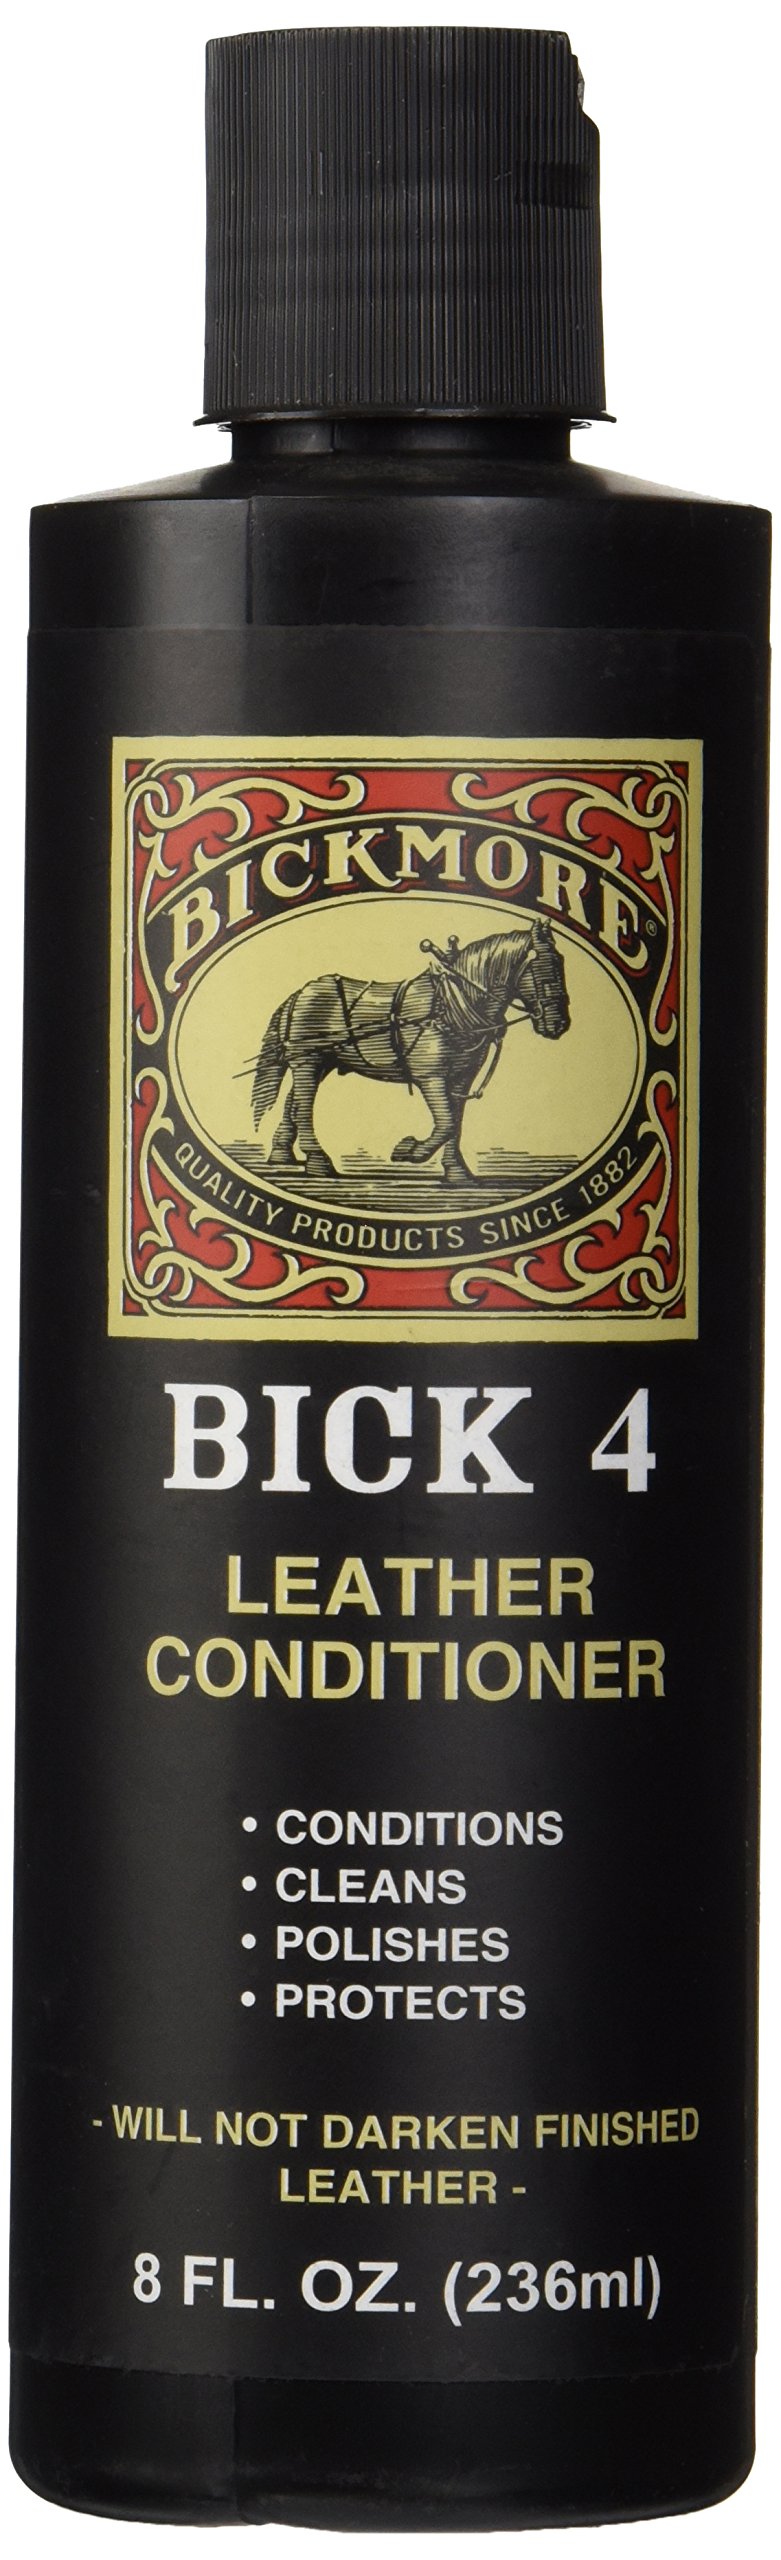 bick 4 leather conditioner instructions